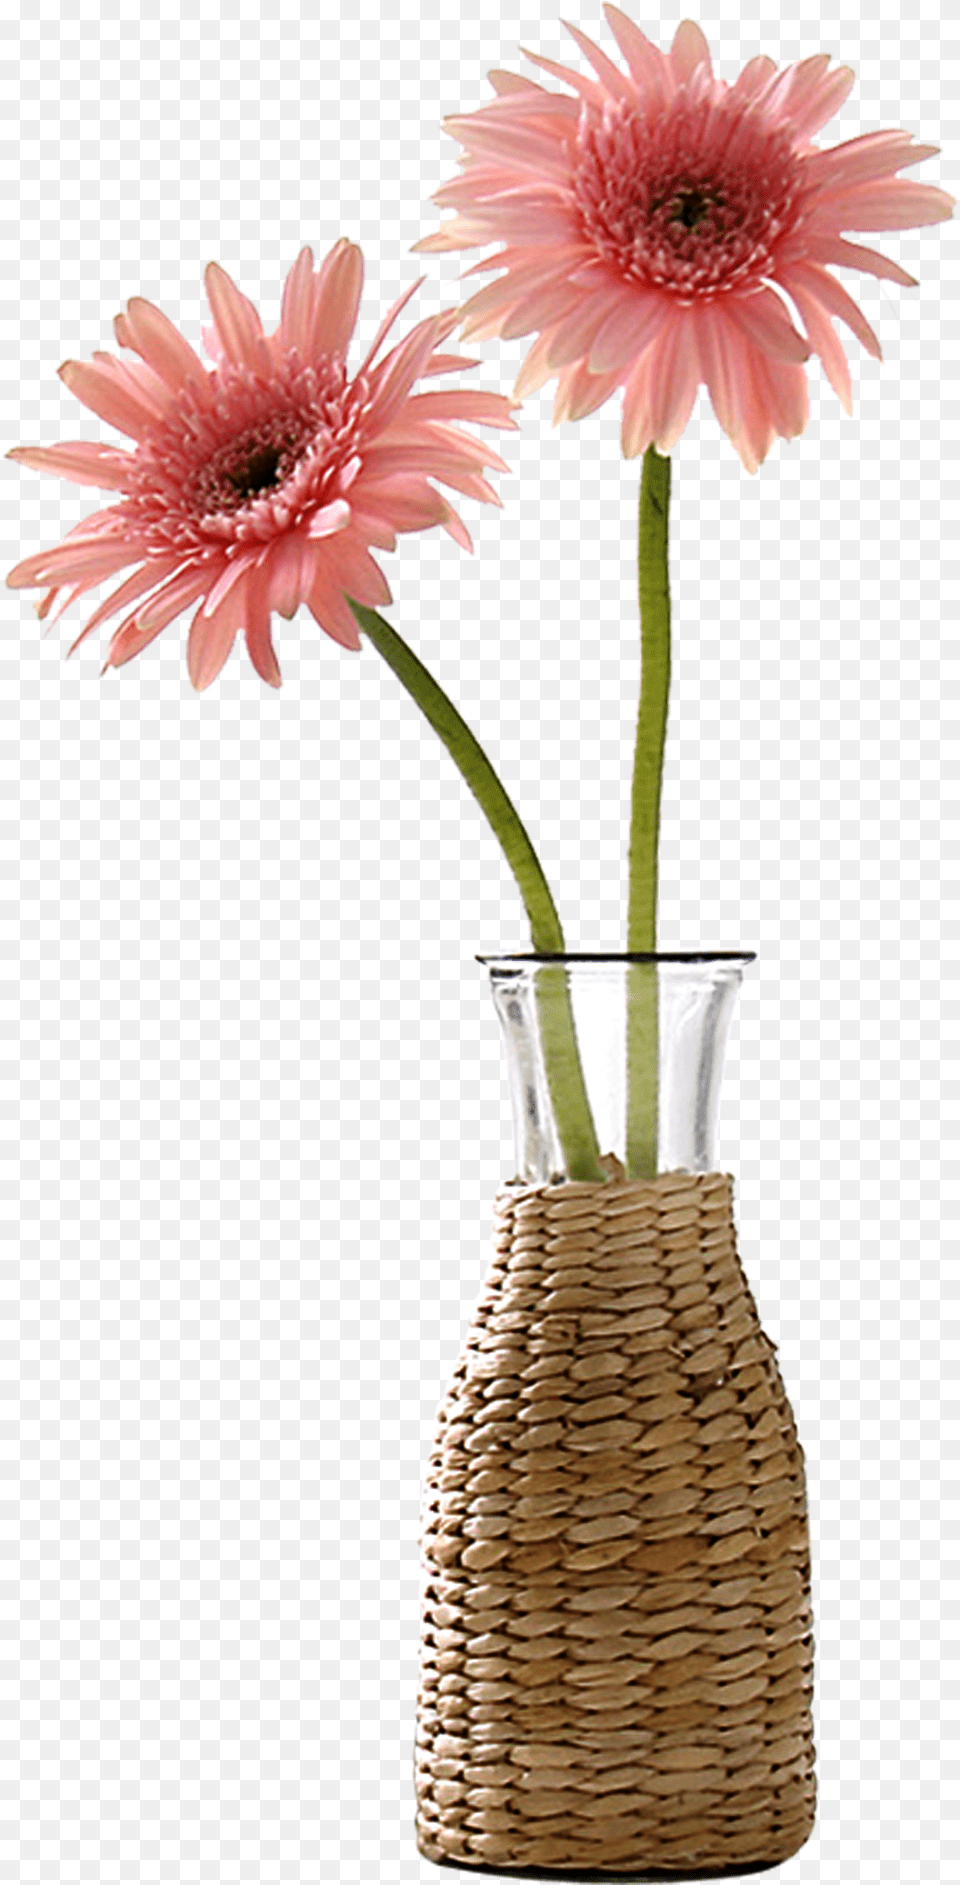 Download Beautiful Vase Flower Decoration Vector Vase Vase With A Flower, Daisy, Pottery, Plant, Jar Png Image